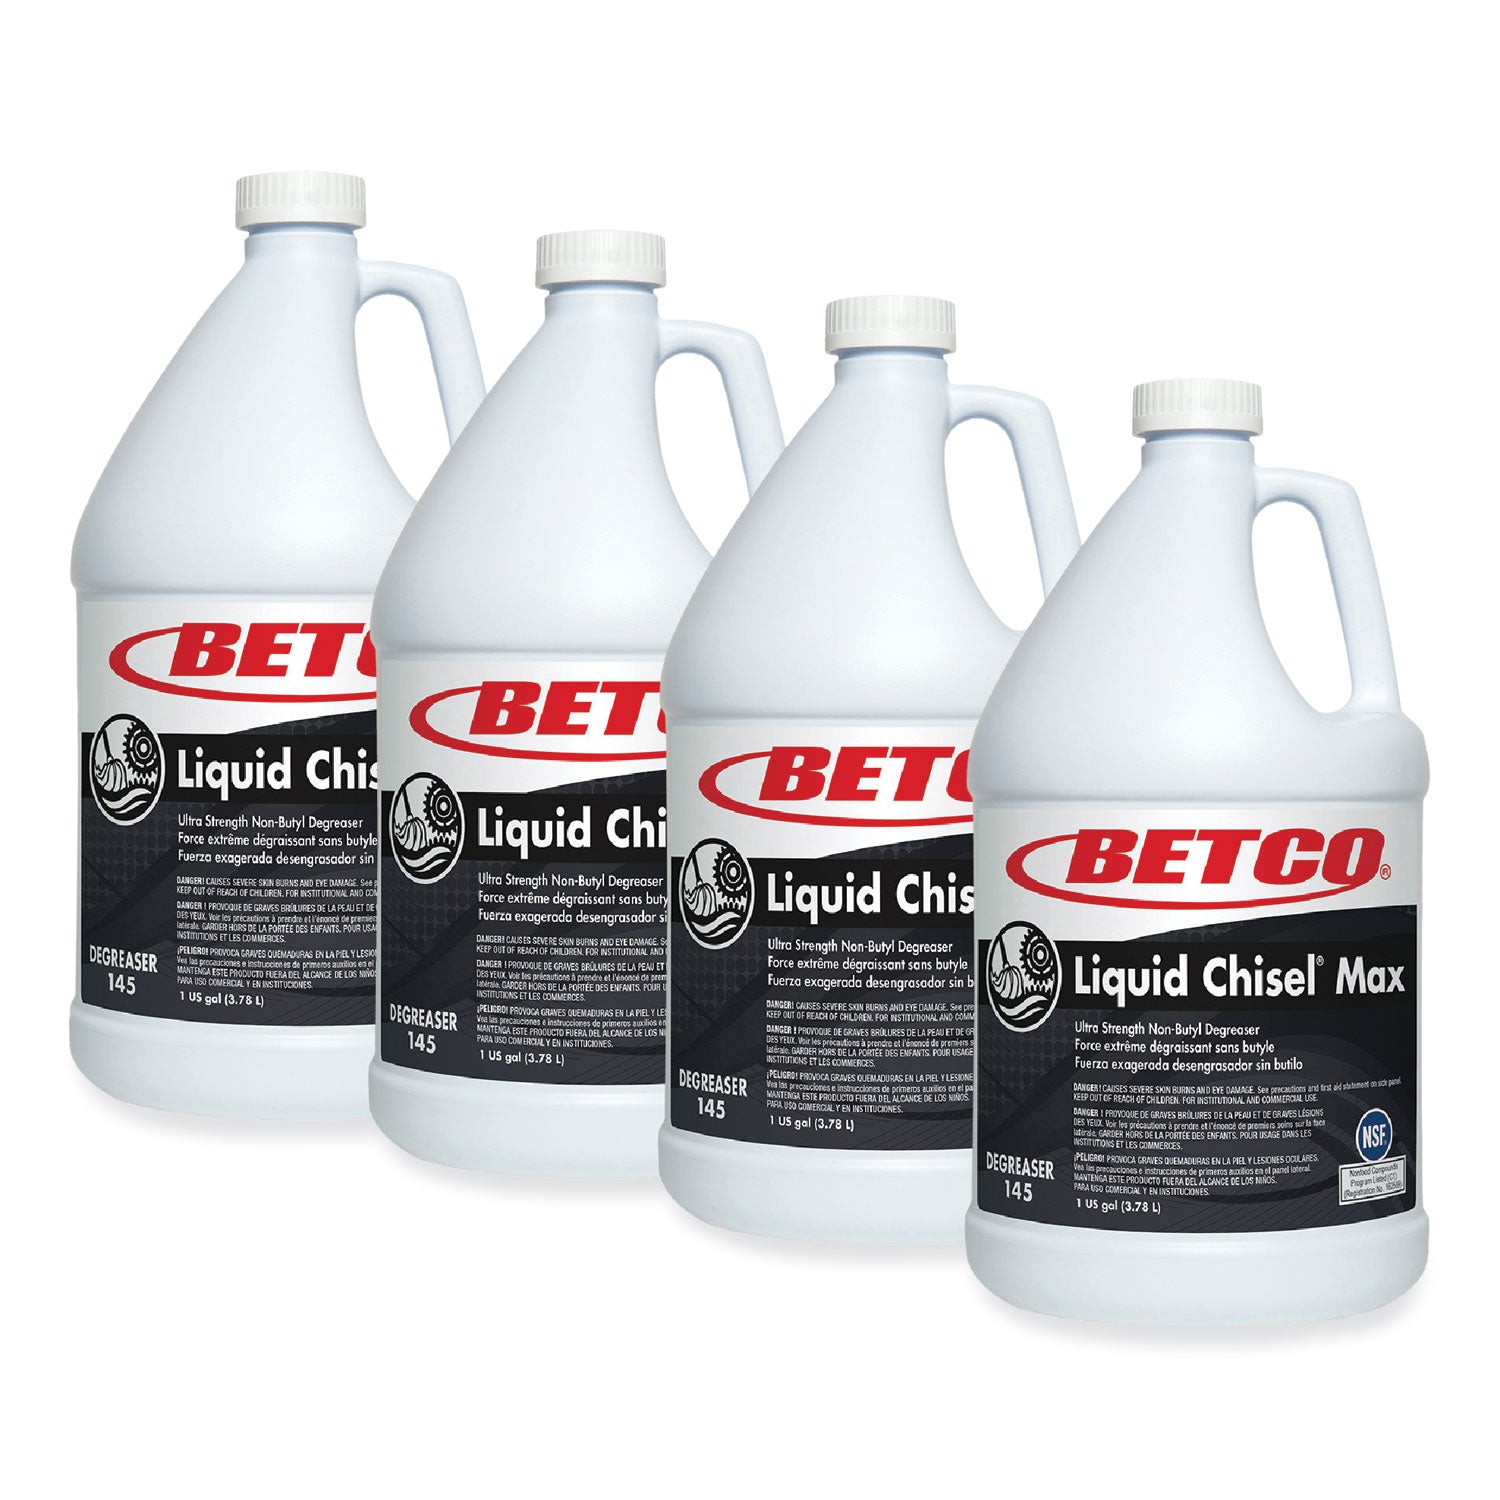 liquid-chisel-max-non-butyl-degreaser-characteristic-scent-1-gal-bottle-4-carton_bet1450400 - 6